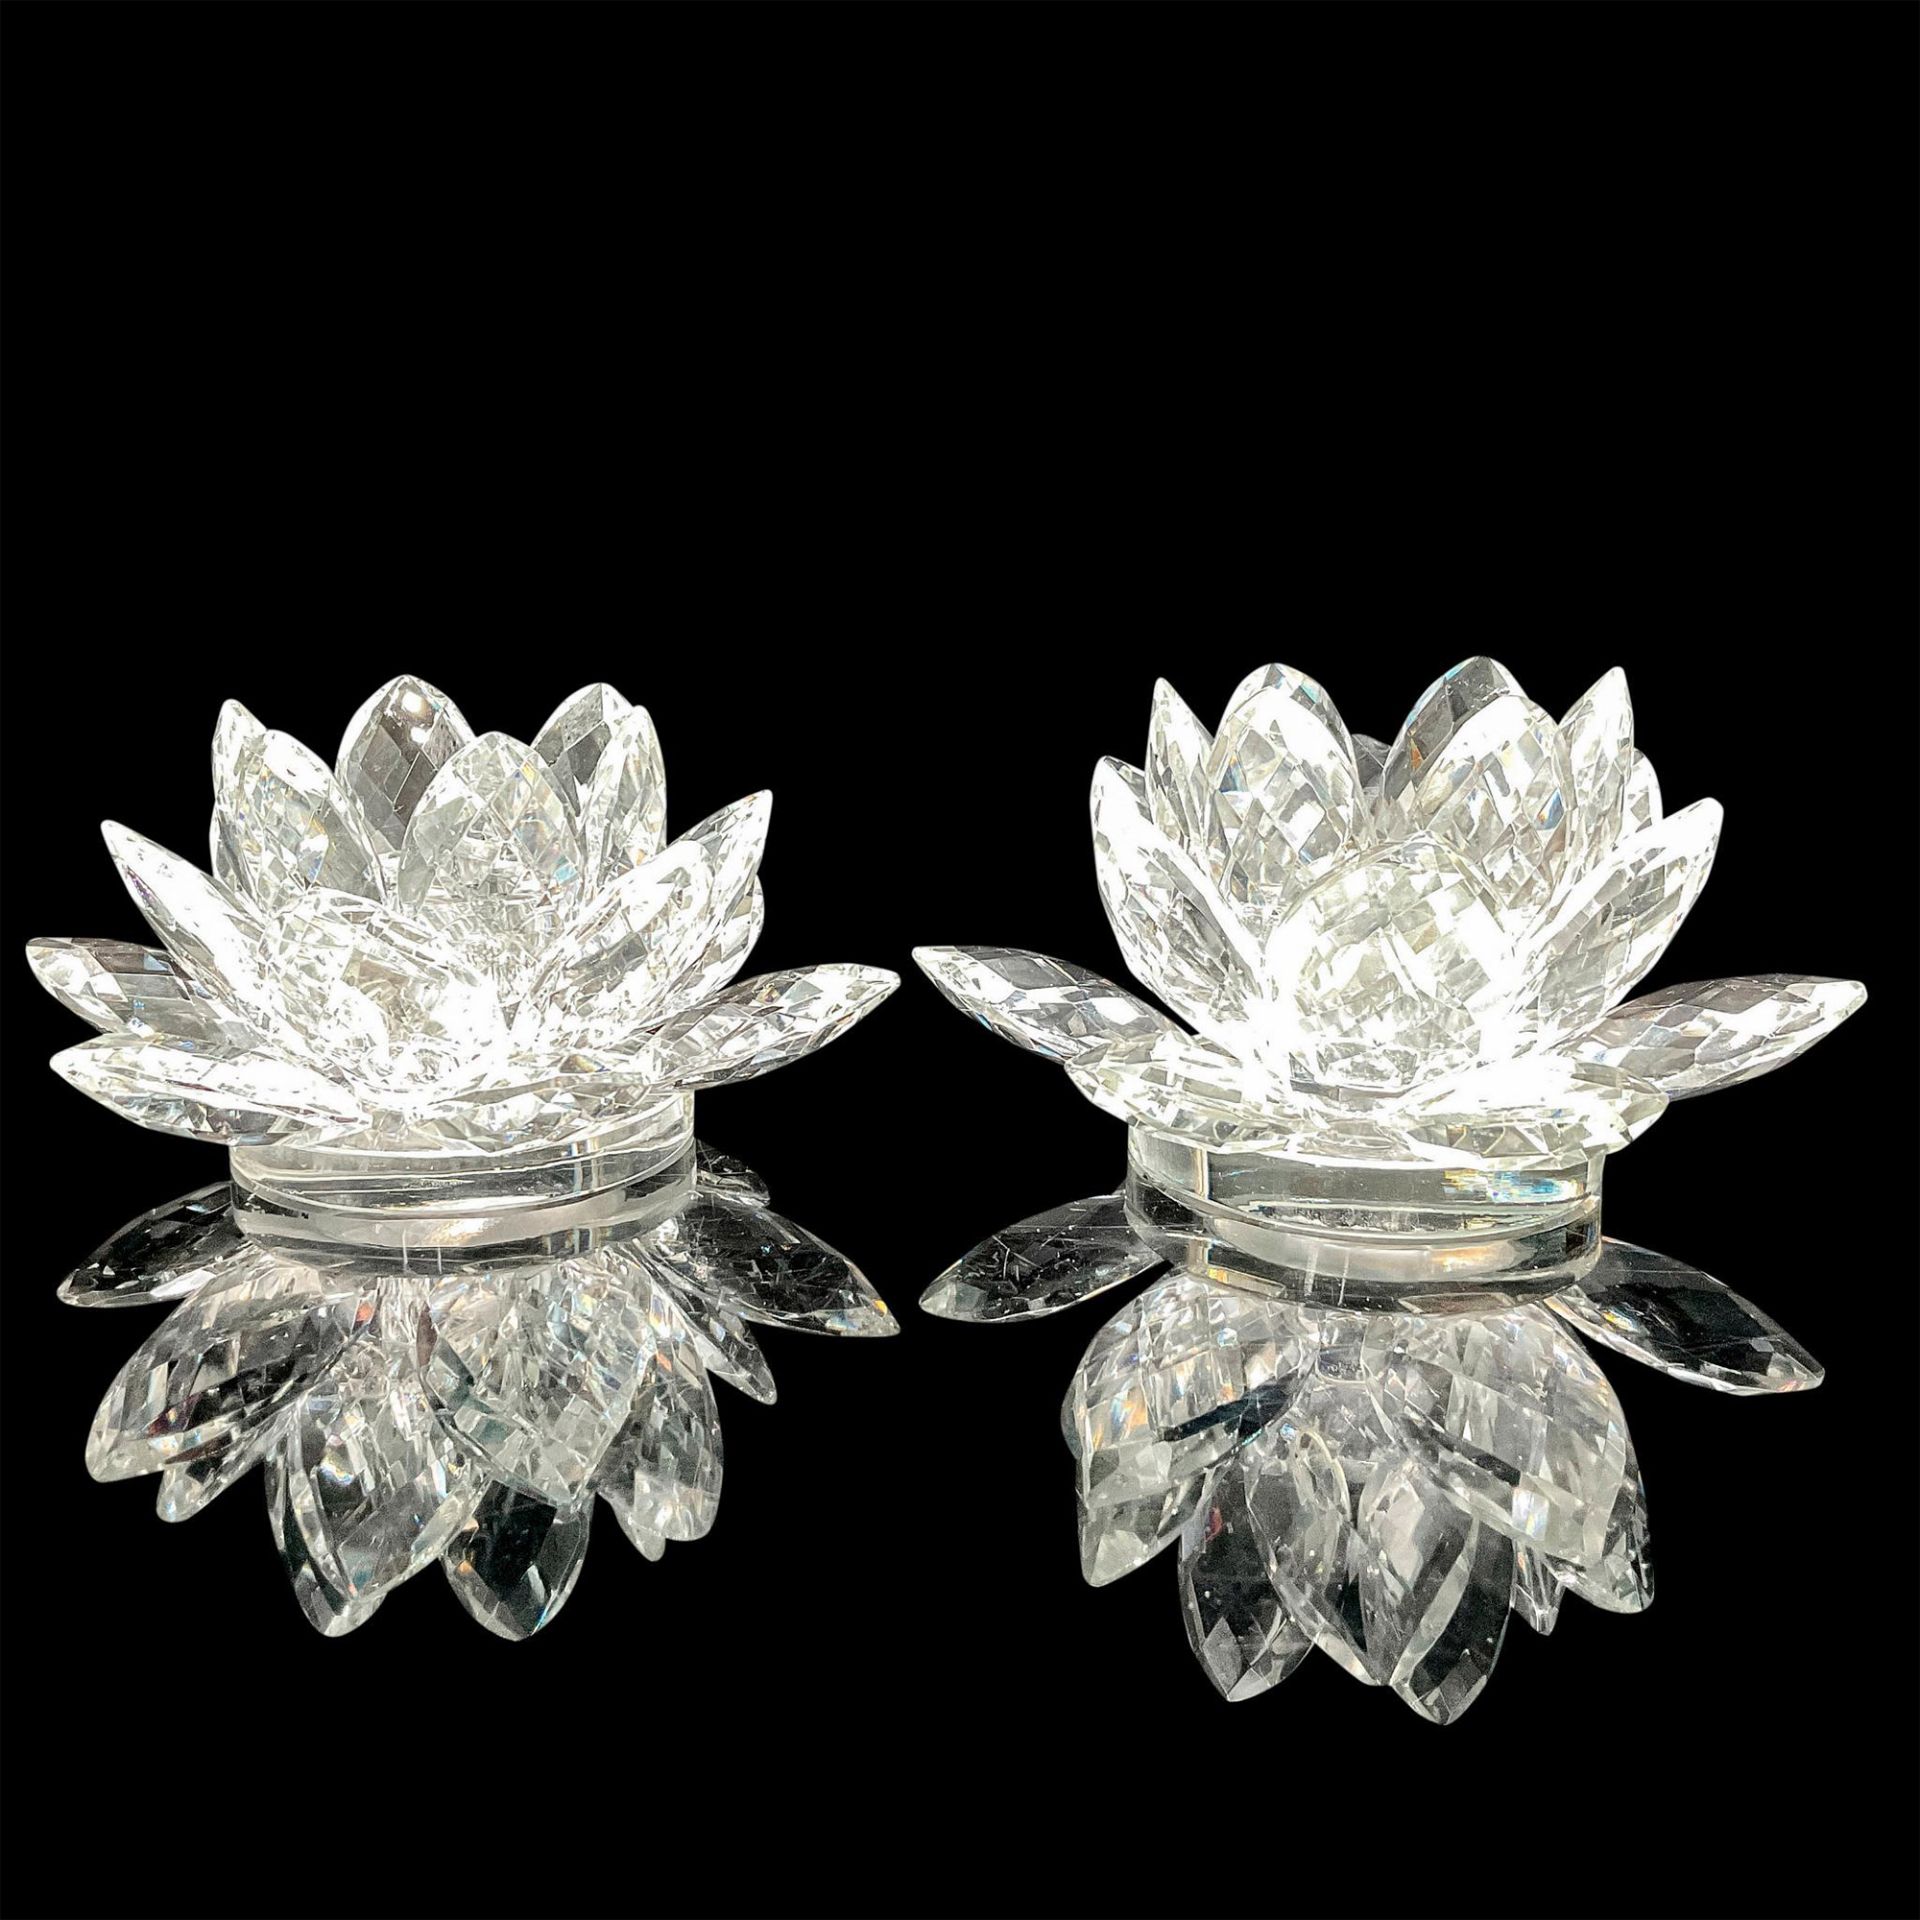 Pair of Shannon Crystal Lotus Candle Holder